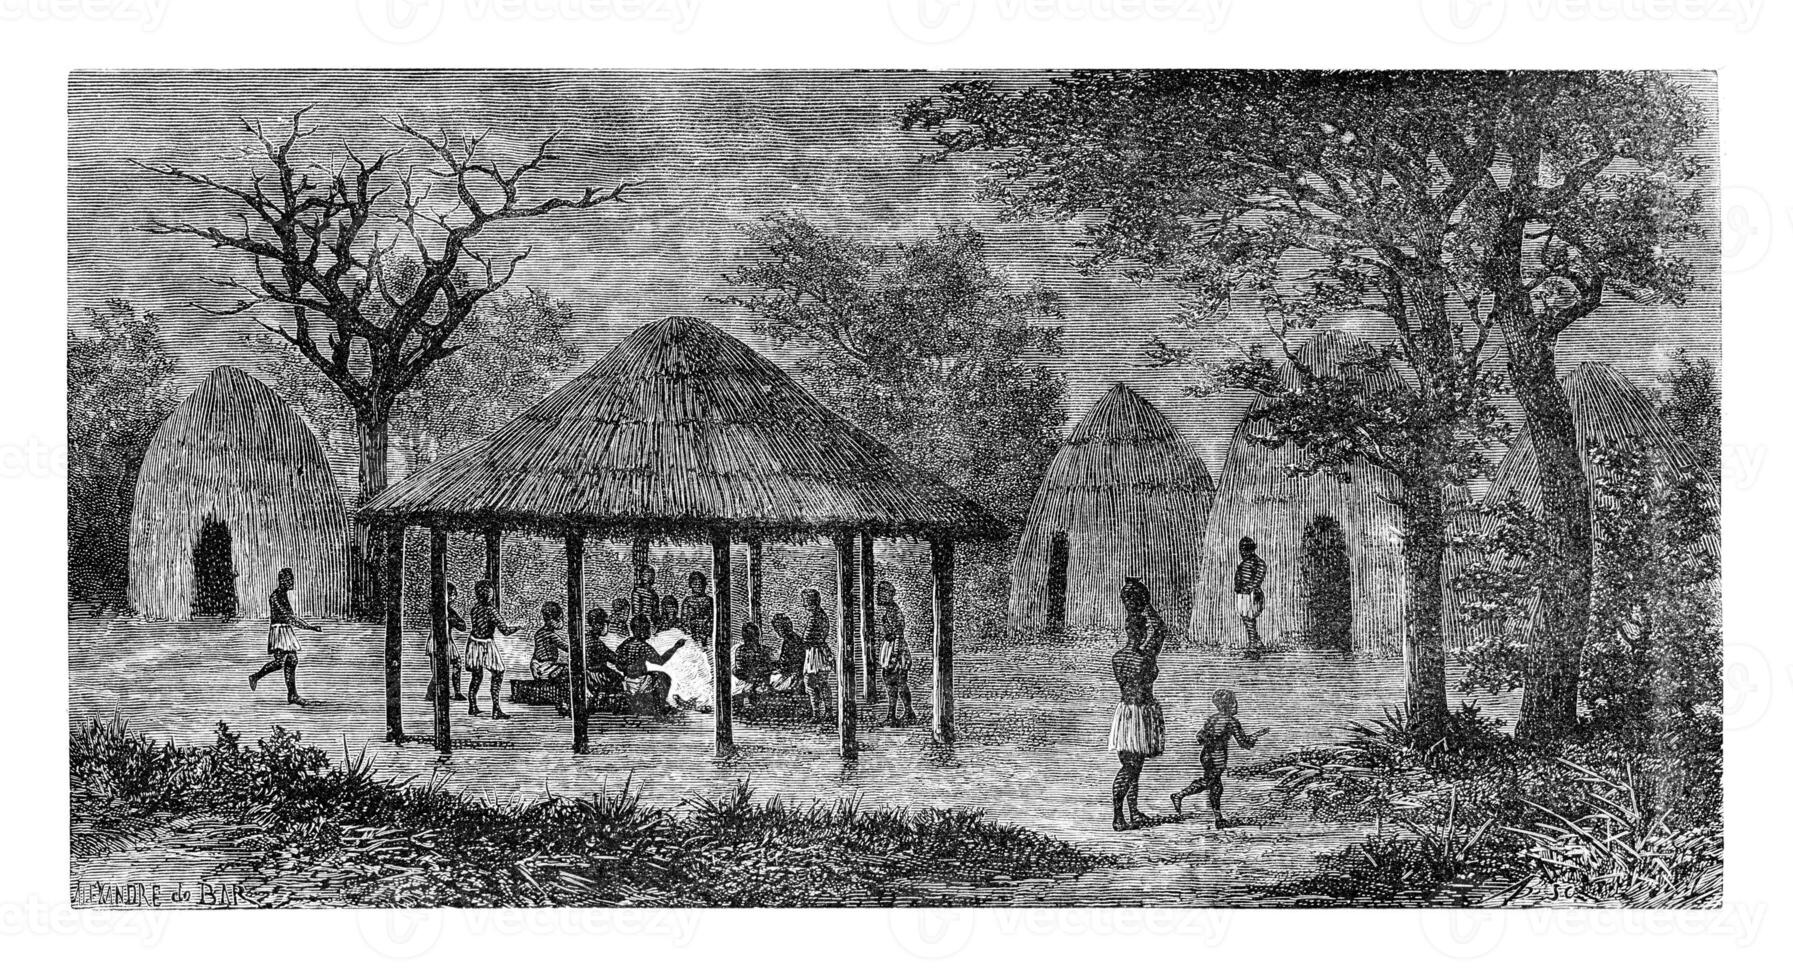 At the Tribal Meeting Place in Angola, Southern Africa, vintage engraving photo